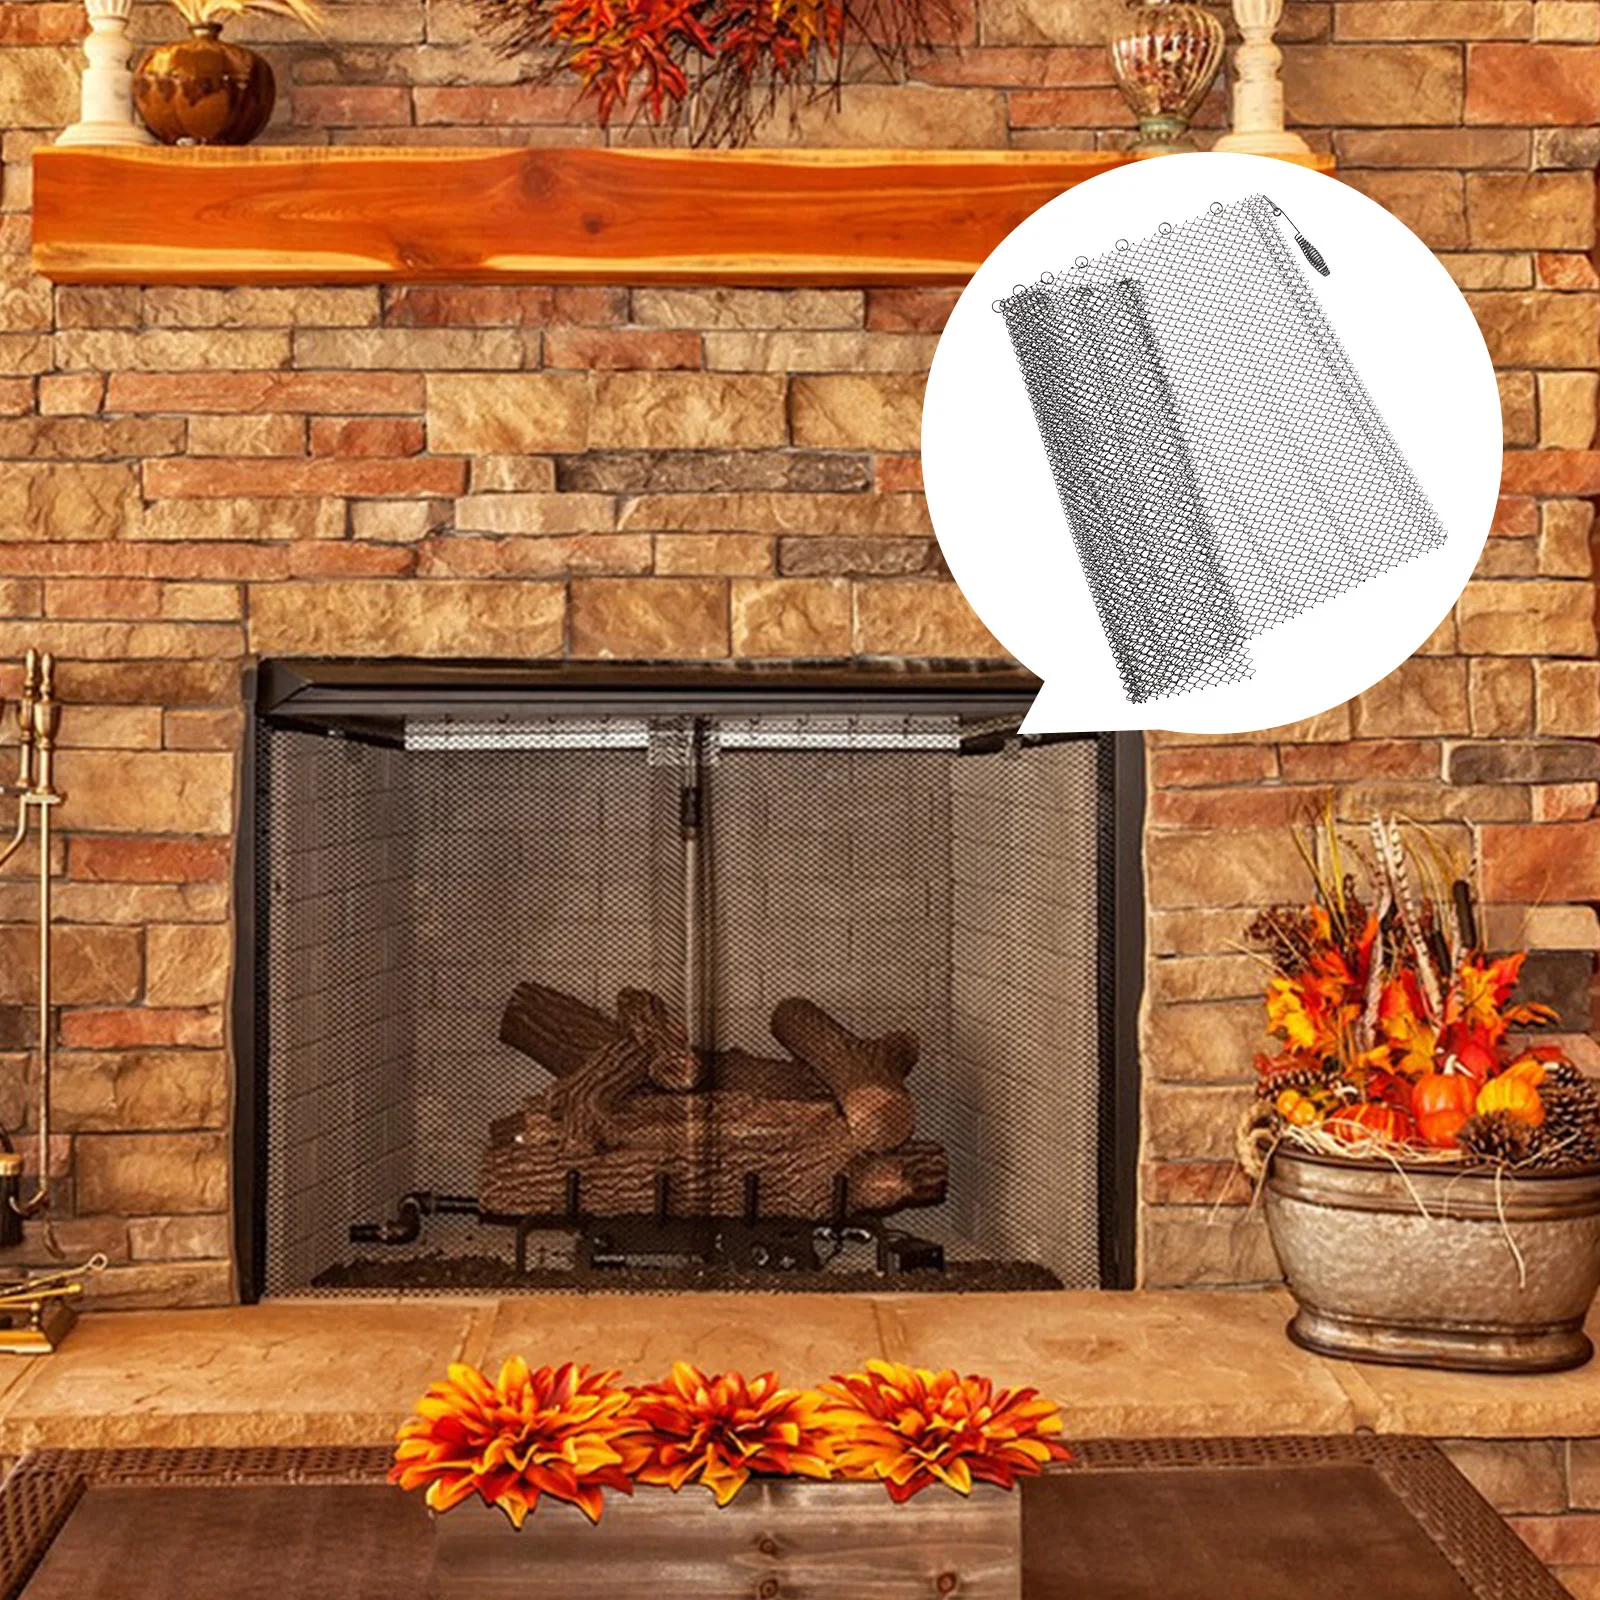 

Hearth Mesh Screen Curtains Fireplace Screens Window Shades Home Iron Sparks Guard Panel